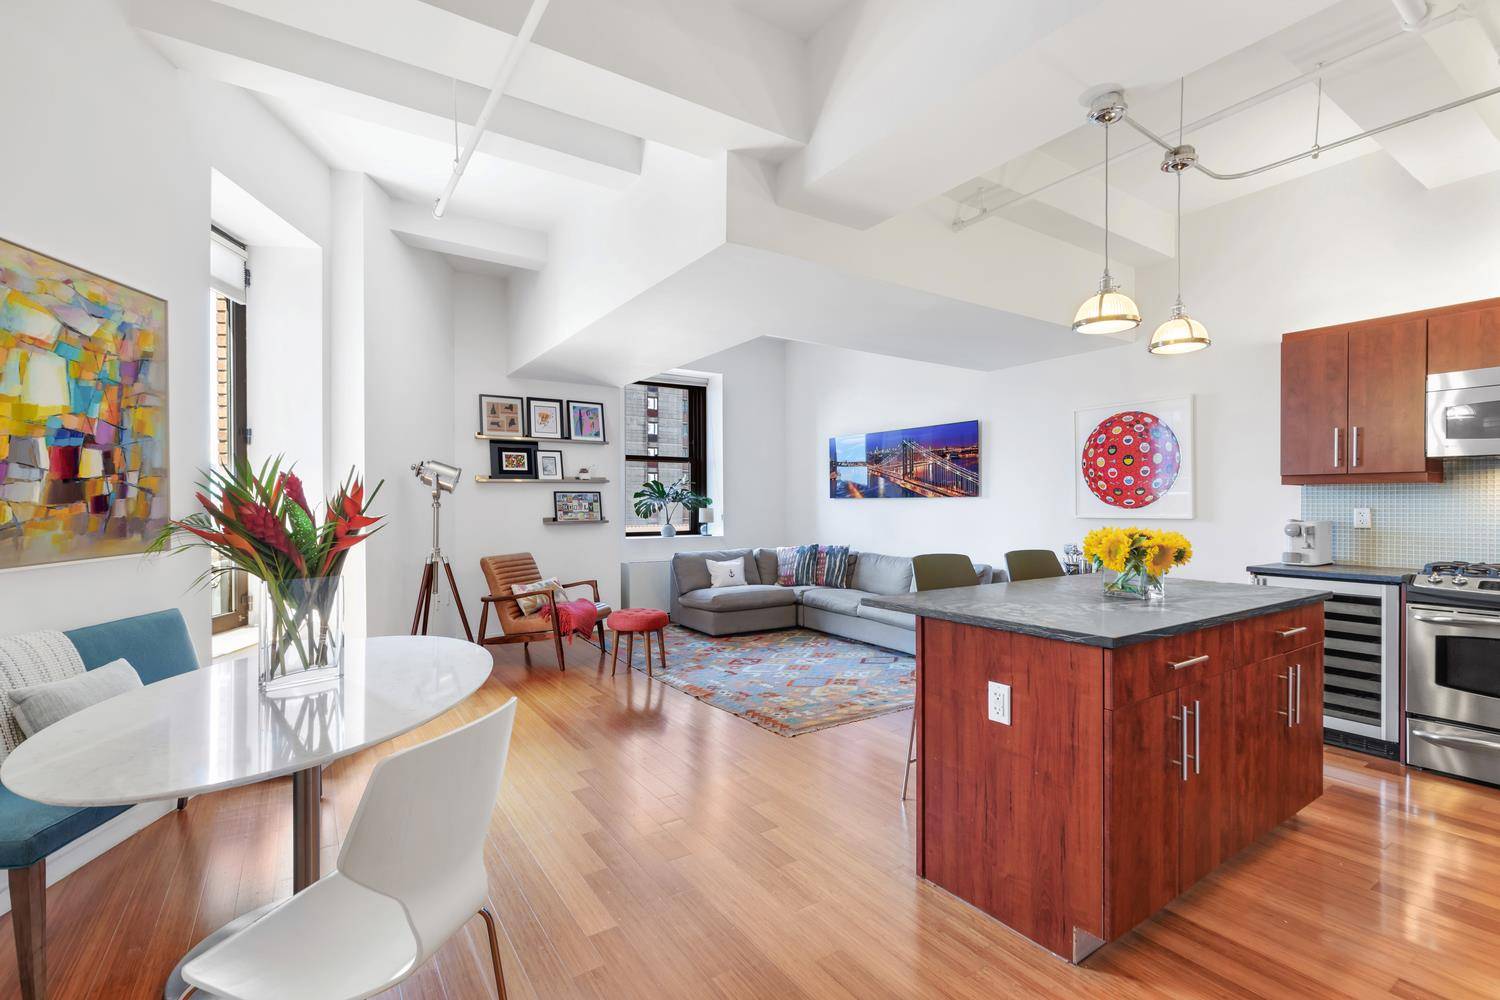 Contact the listing agent, By appointment only BellTel Lofts, landmarked Art Deco building, Downtown Brooklyn loft living !